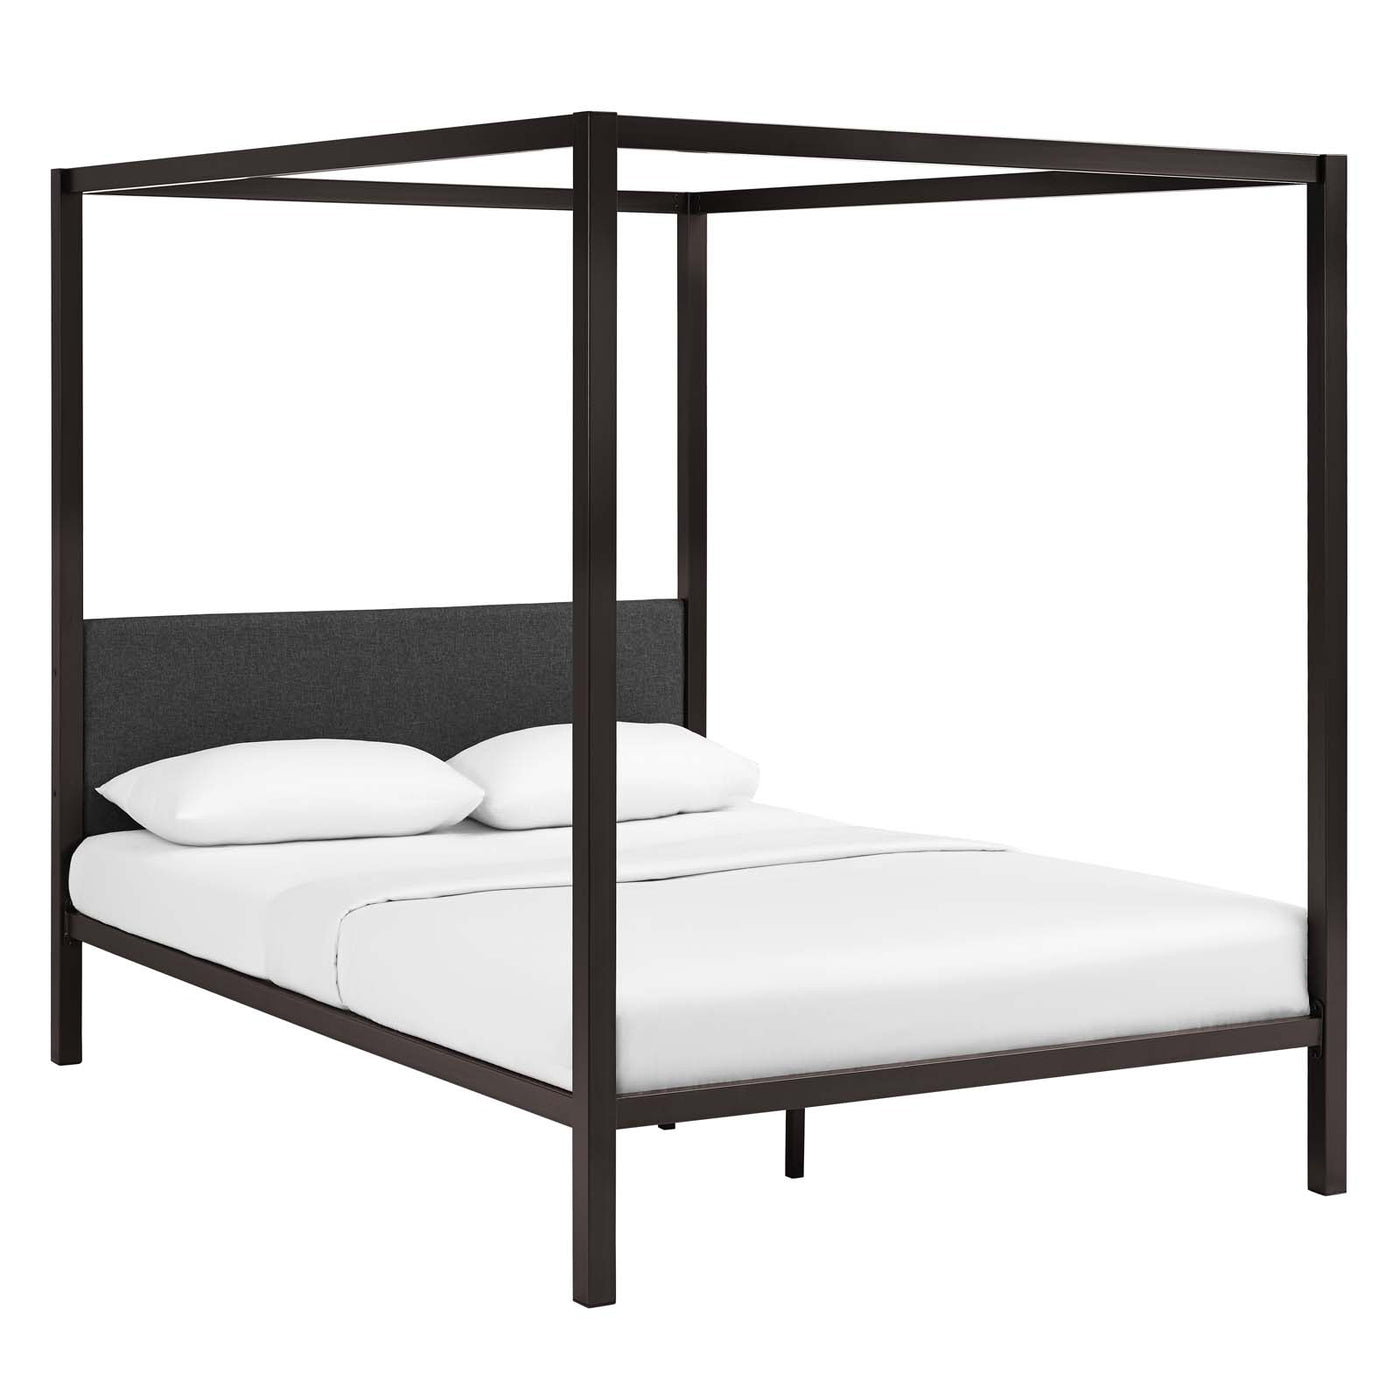 Raina Queen Canopy Bed Frame